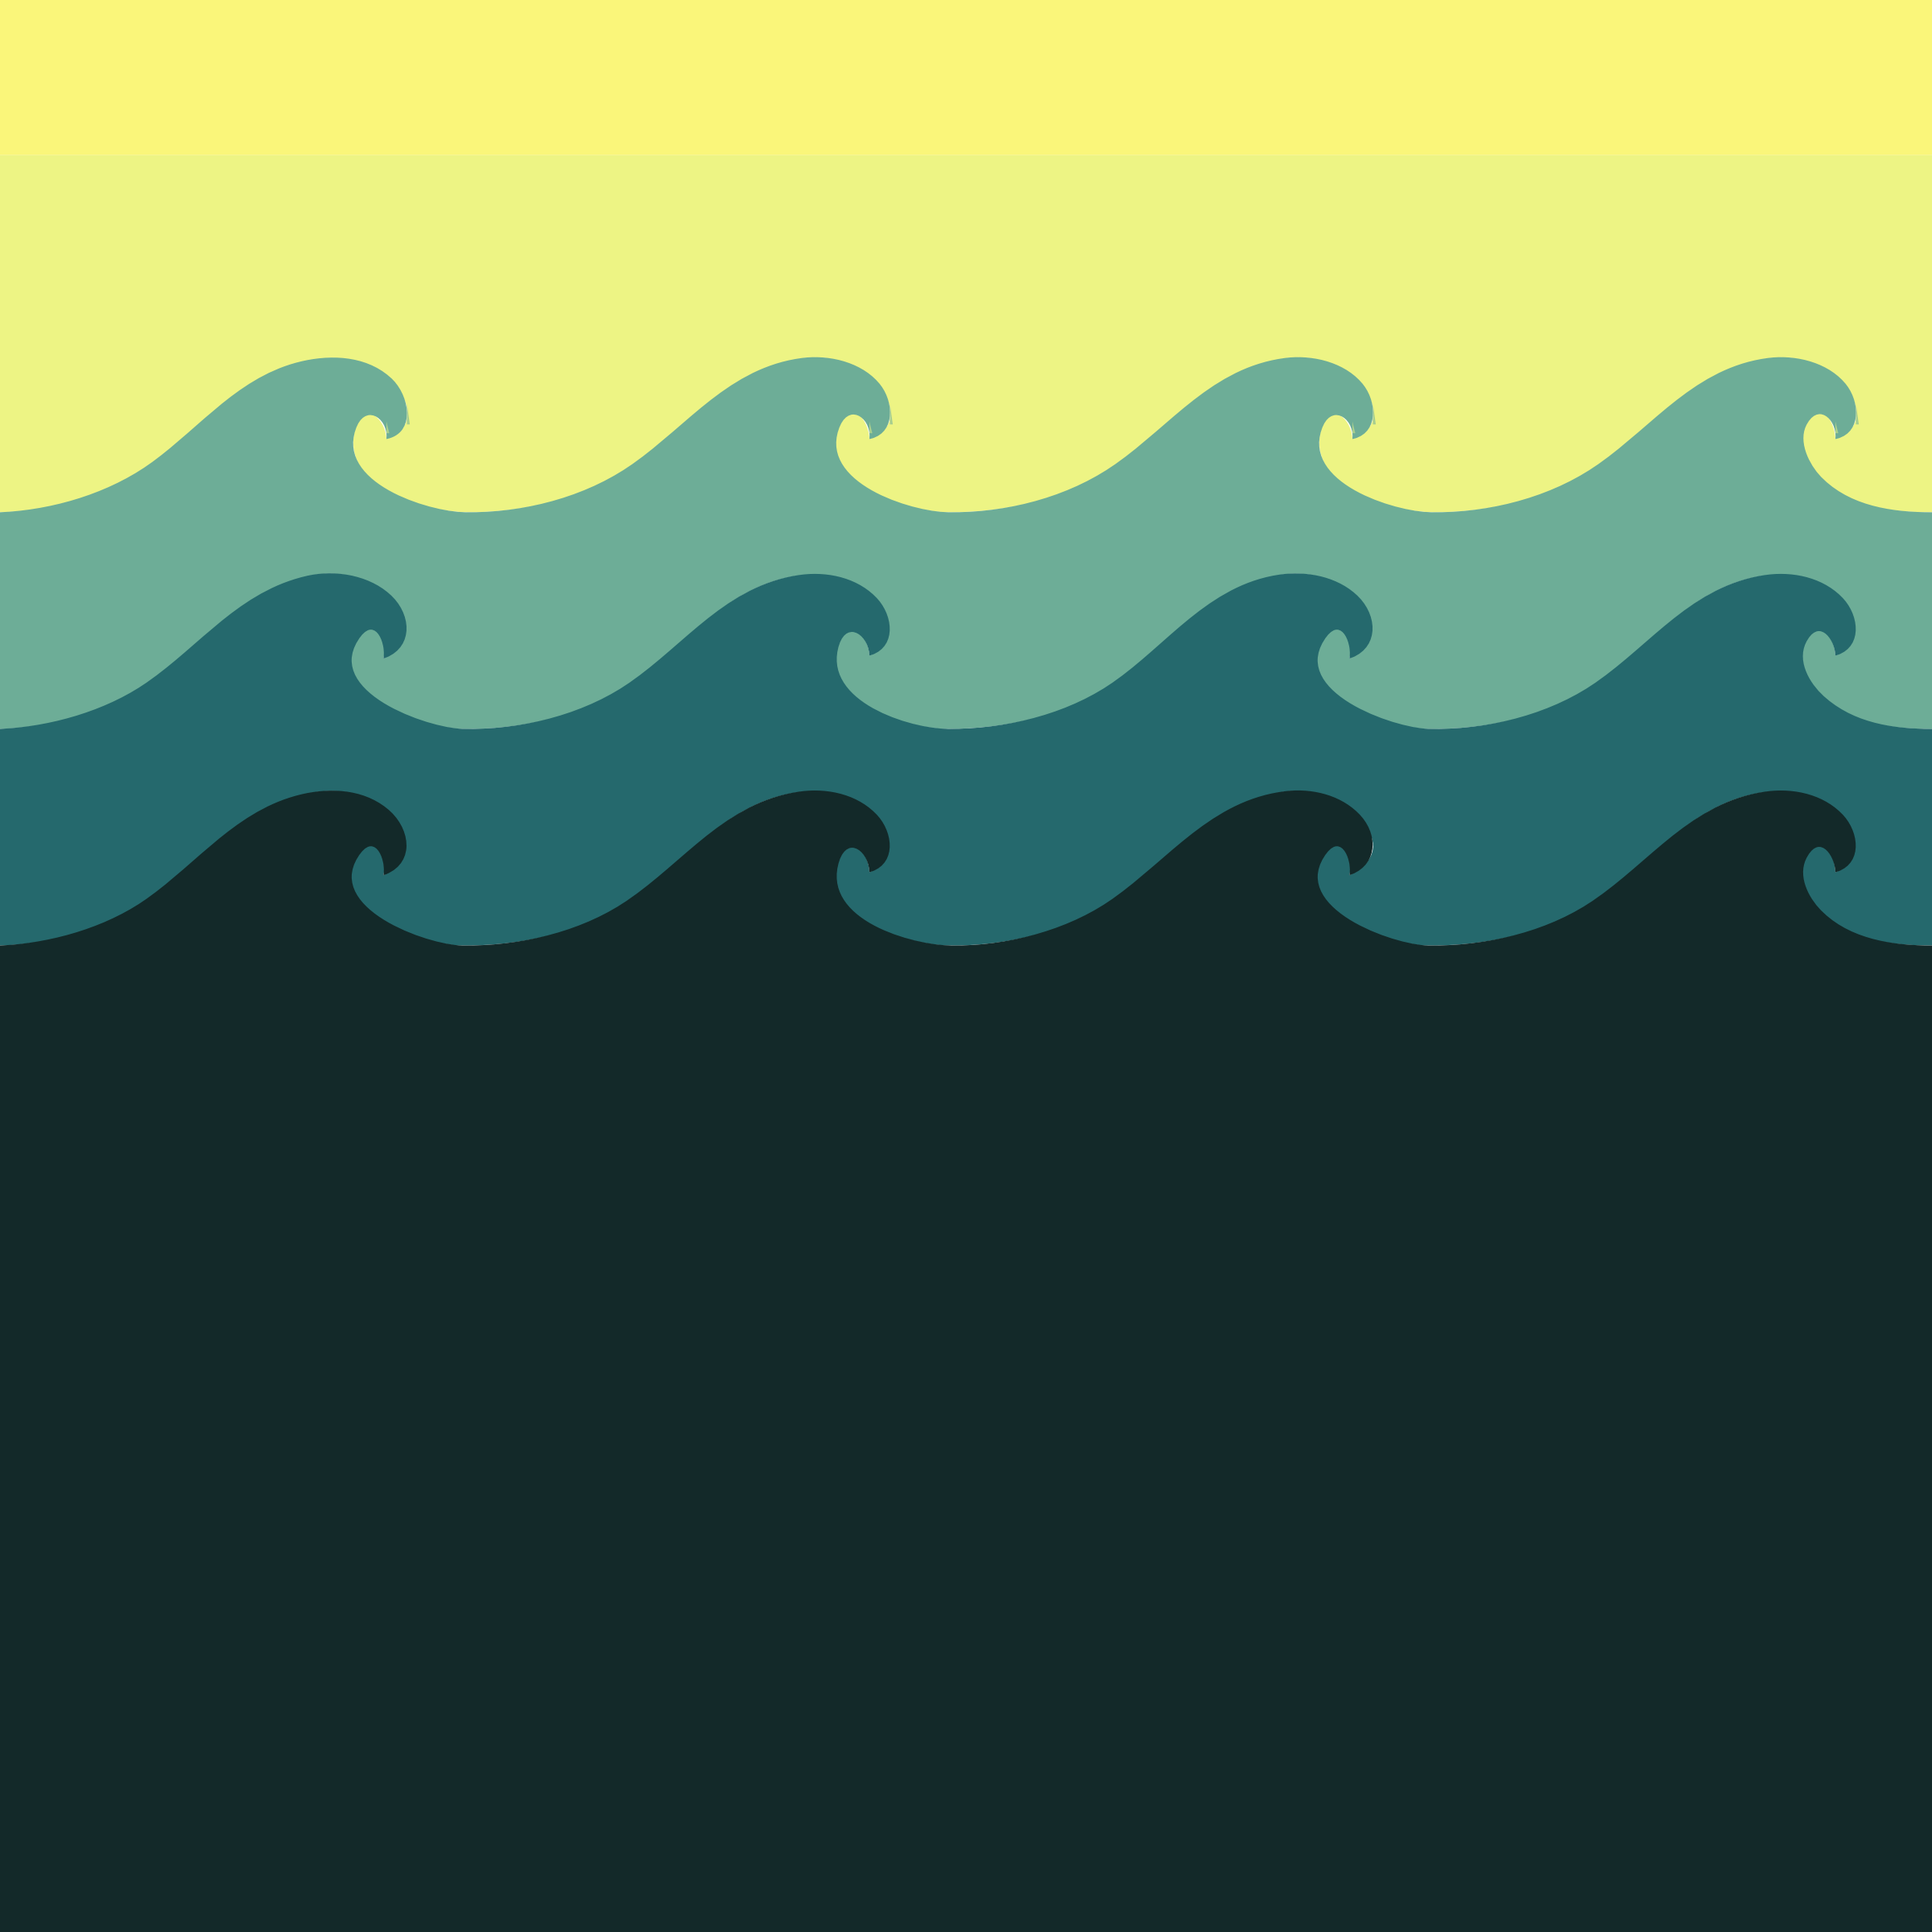 Clipart wave wave pattern wave. Free cliparts download clip